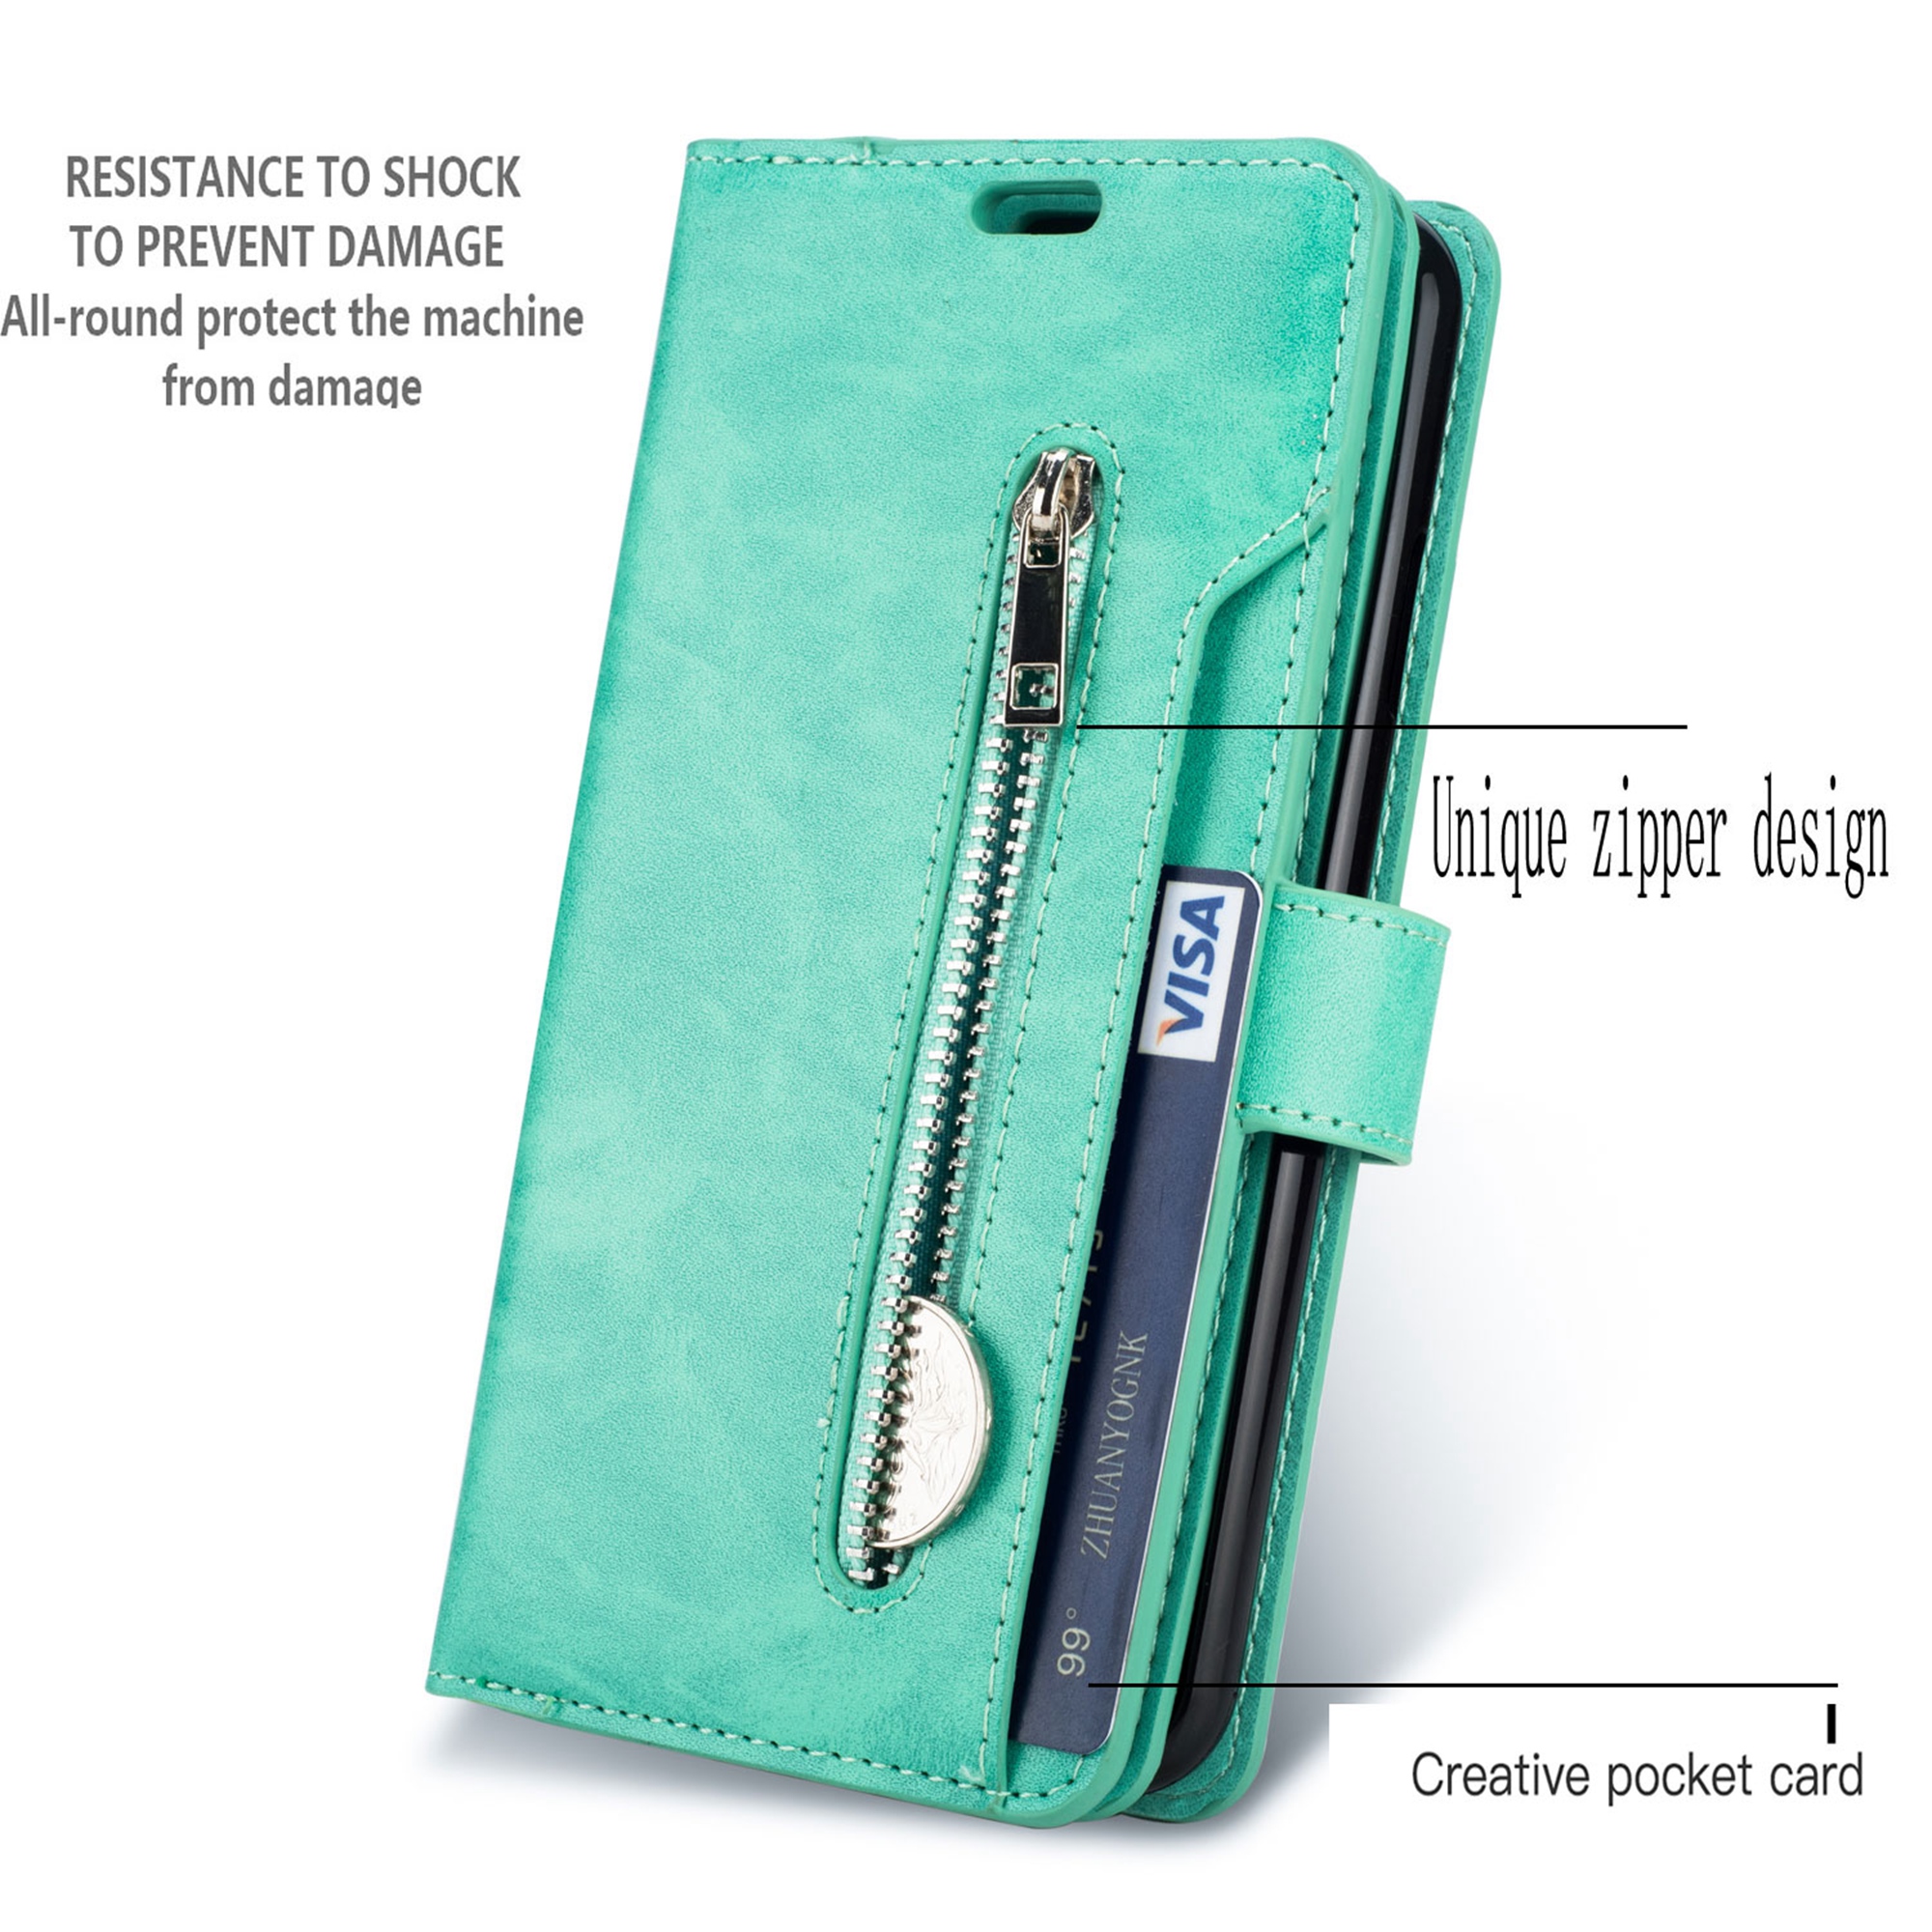 iPhone 11 Pro Max 6.5 inch Wallet Case, Dteck 9 Card Slots Premium Leather Zipper Purse case Flip Kickstand Folio Magnetic with Wrist Strap Credit Cash Cover For Apple iPhone 11 Pro Max, Mint - image 2 of 7